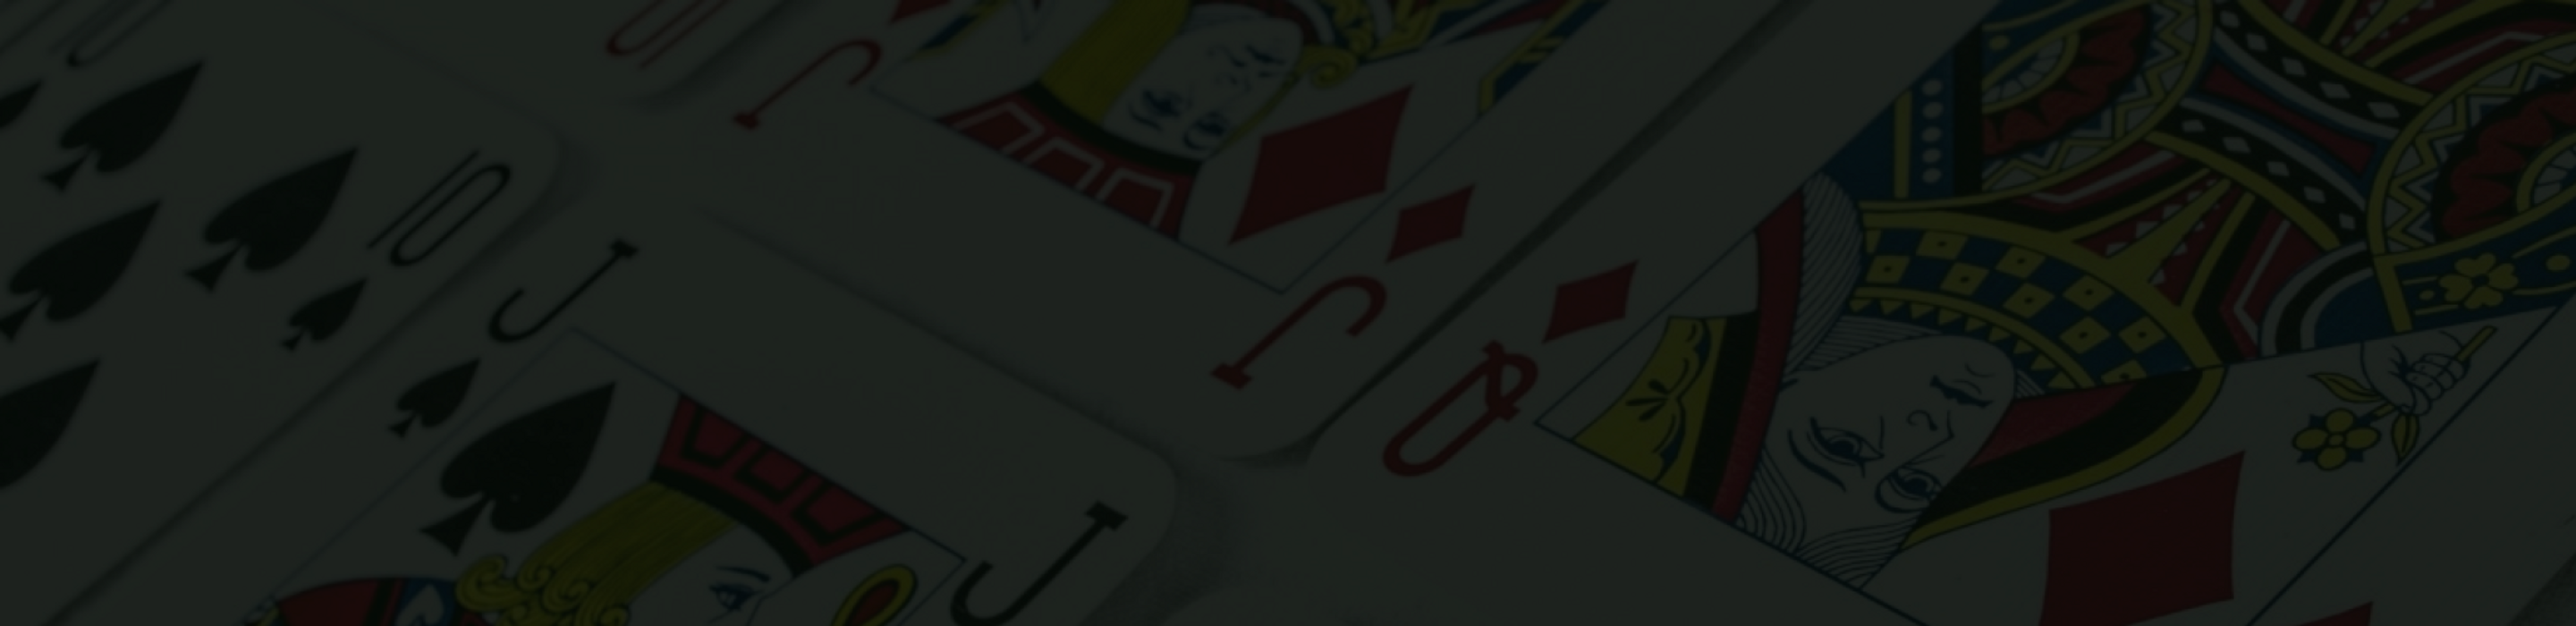 PA Online Casino Casino Review Banner